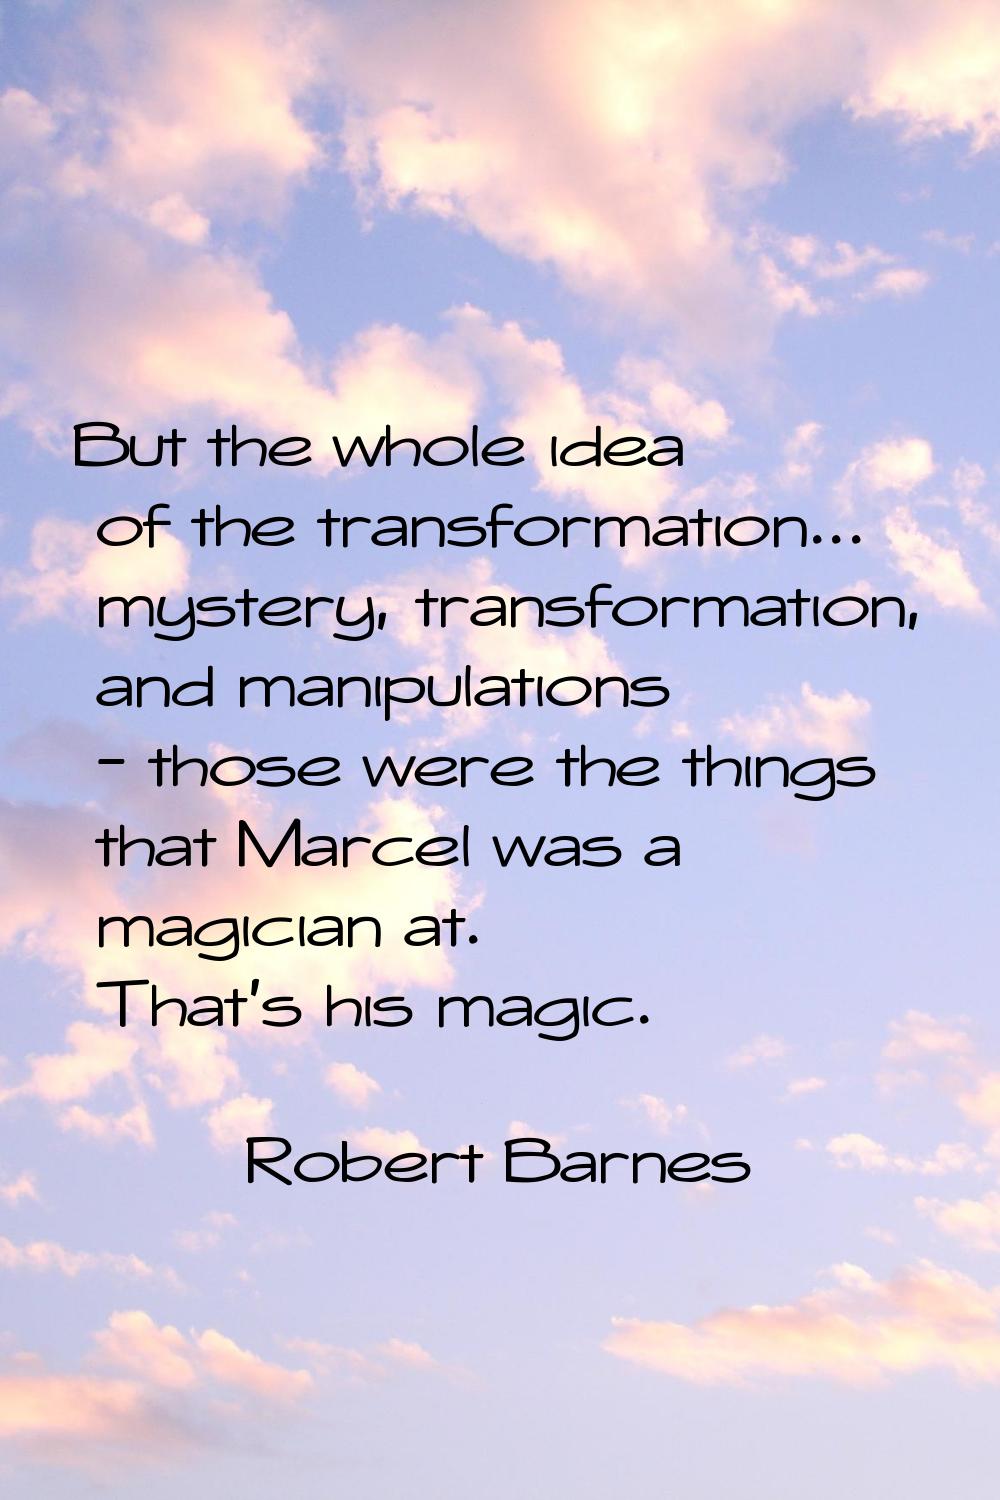 But the whole idea of the transformation... mystery, transformation, and manipulations - those were